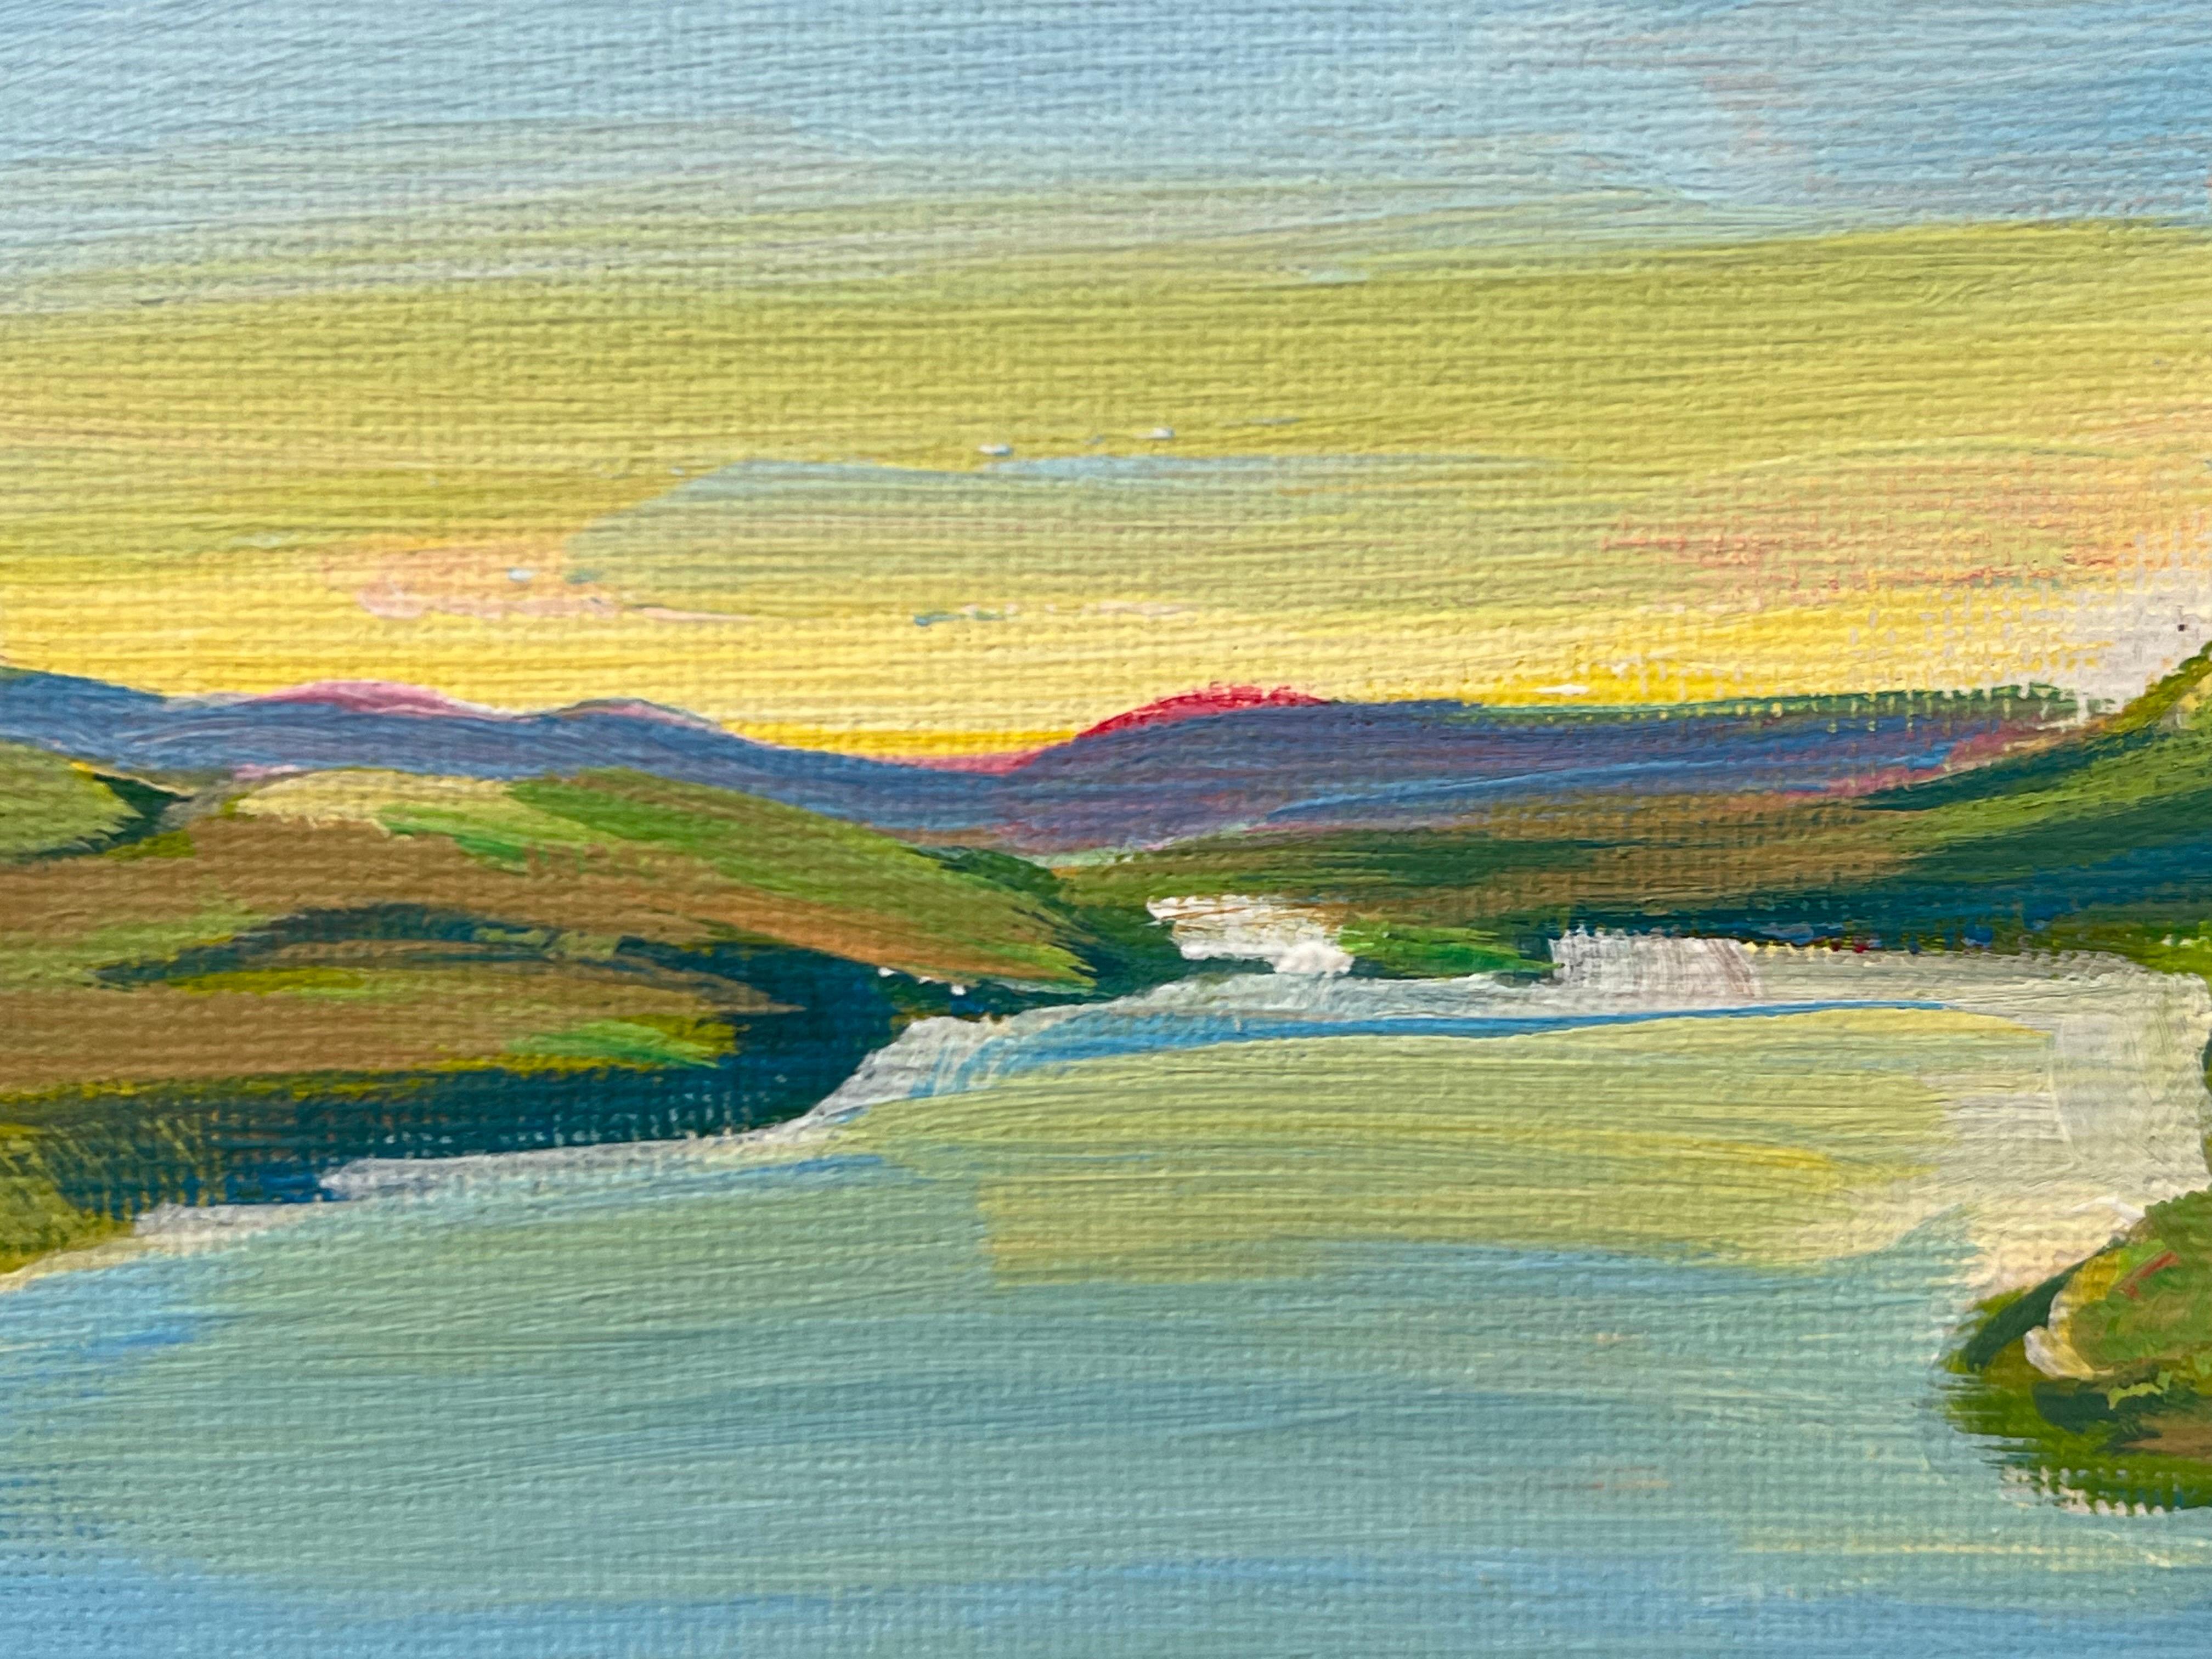 Miniature Painting Study of Hudson River, New York State, USA by British Artist For Sale 4